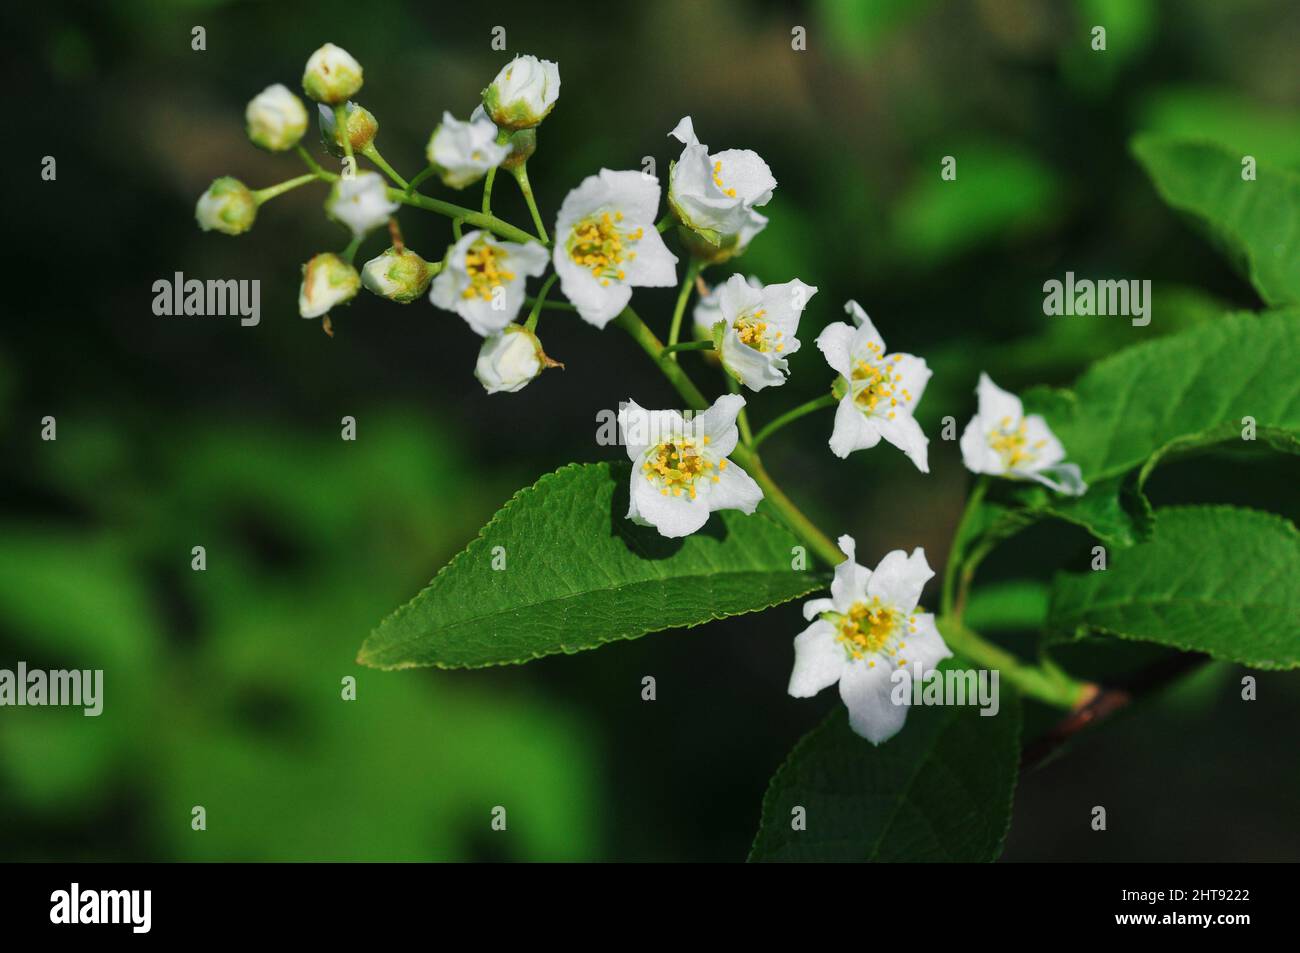 Selective focus shot of blooming white Multiflora rose flowers in the garden Stock Photo